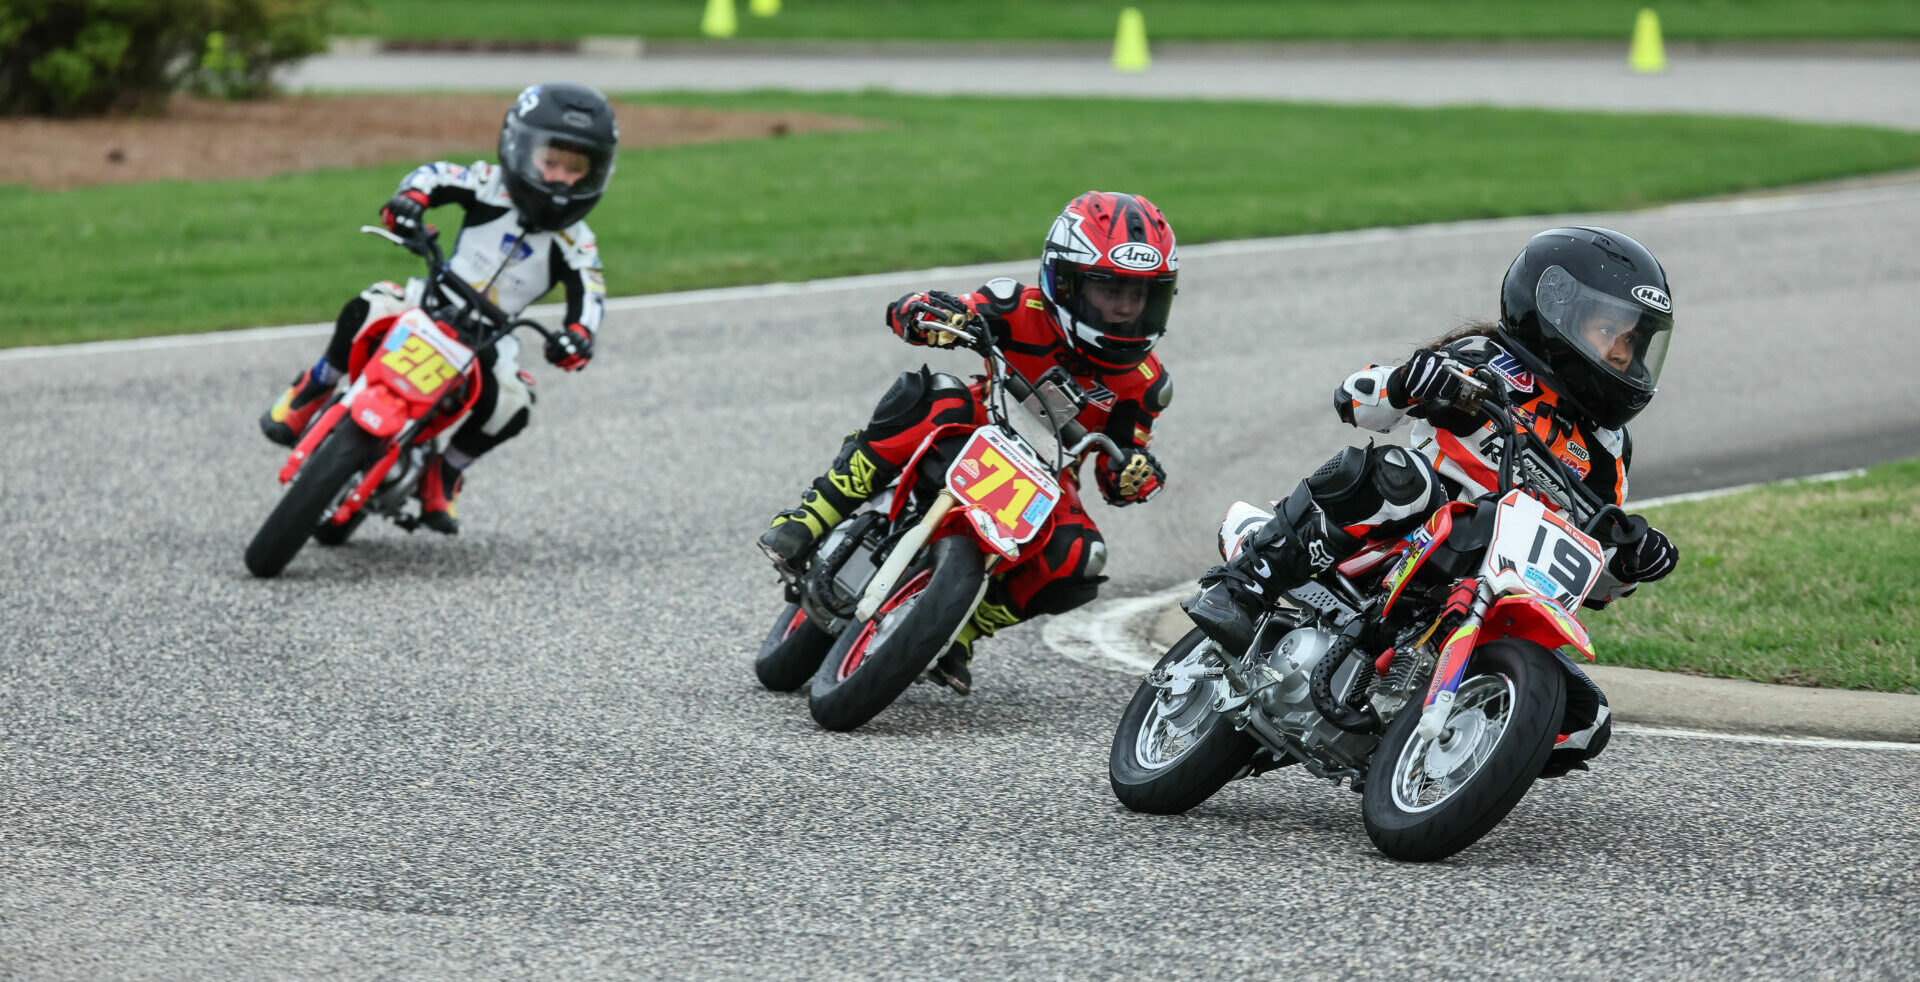 Grober Reyes (19) leads Weston Fager (71) and Cruise Texter (26) during a MotoAmerica Mini Cup Stock 50 race at Barber Motorsports Park in 2023. Photo by Brian J. Nelson.Grober Reyes (19) leads Weston Fager (71) and Cruise Texter (26) during a MotoAmerica Mini Cup Stock 50 race at Barber Motorsports Park in 2023. Photo by Brian J. Nelson.